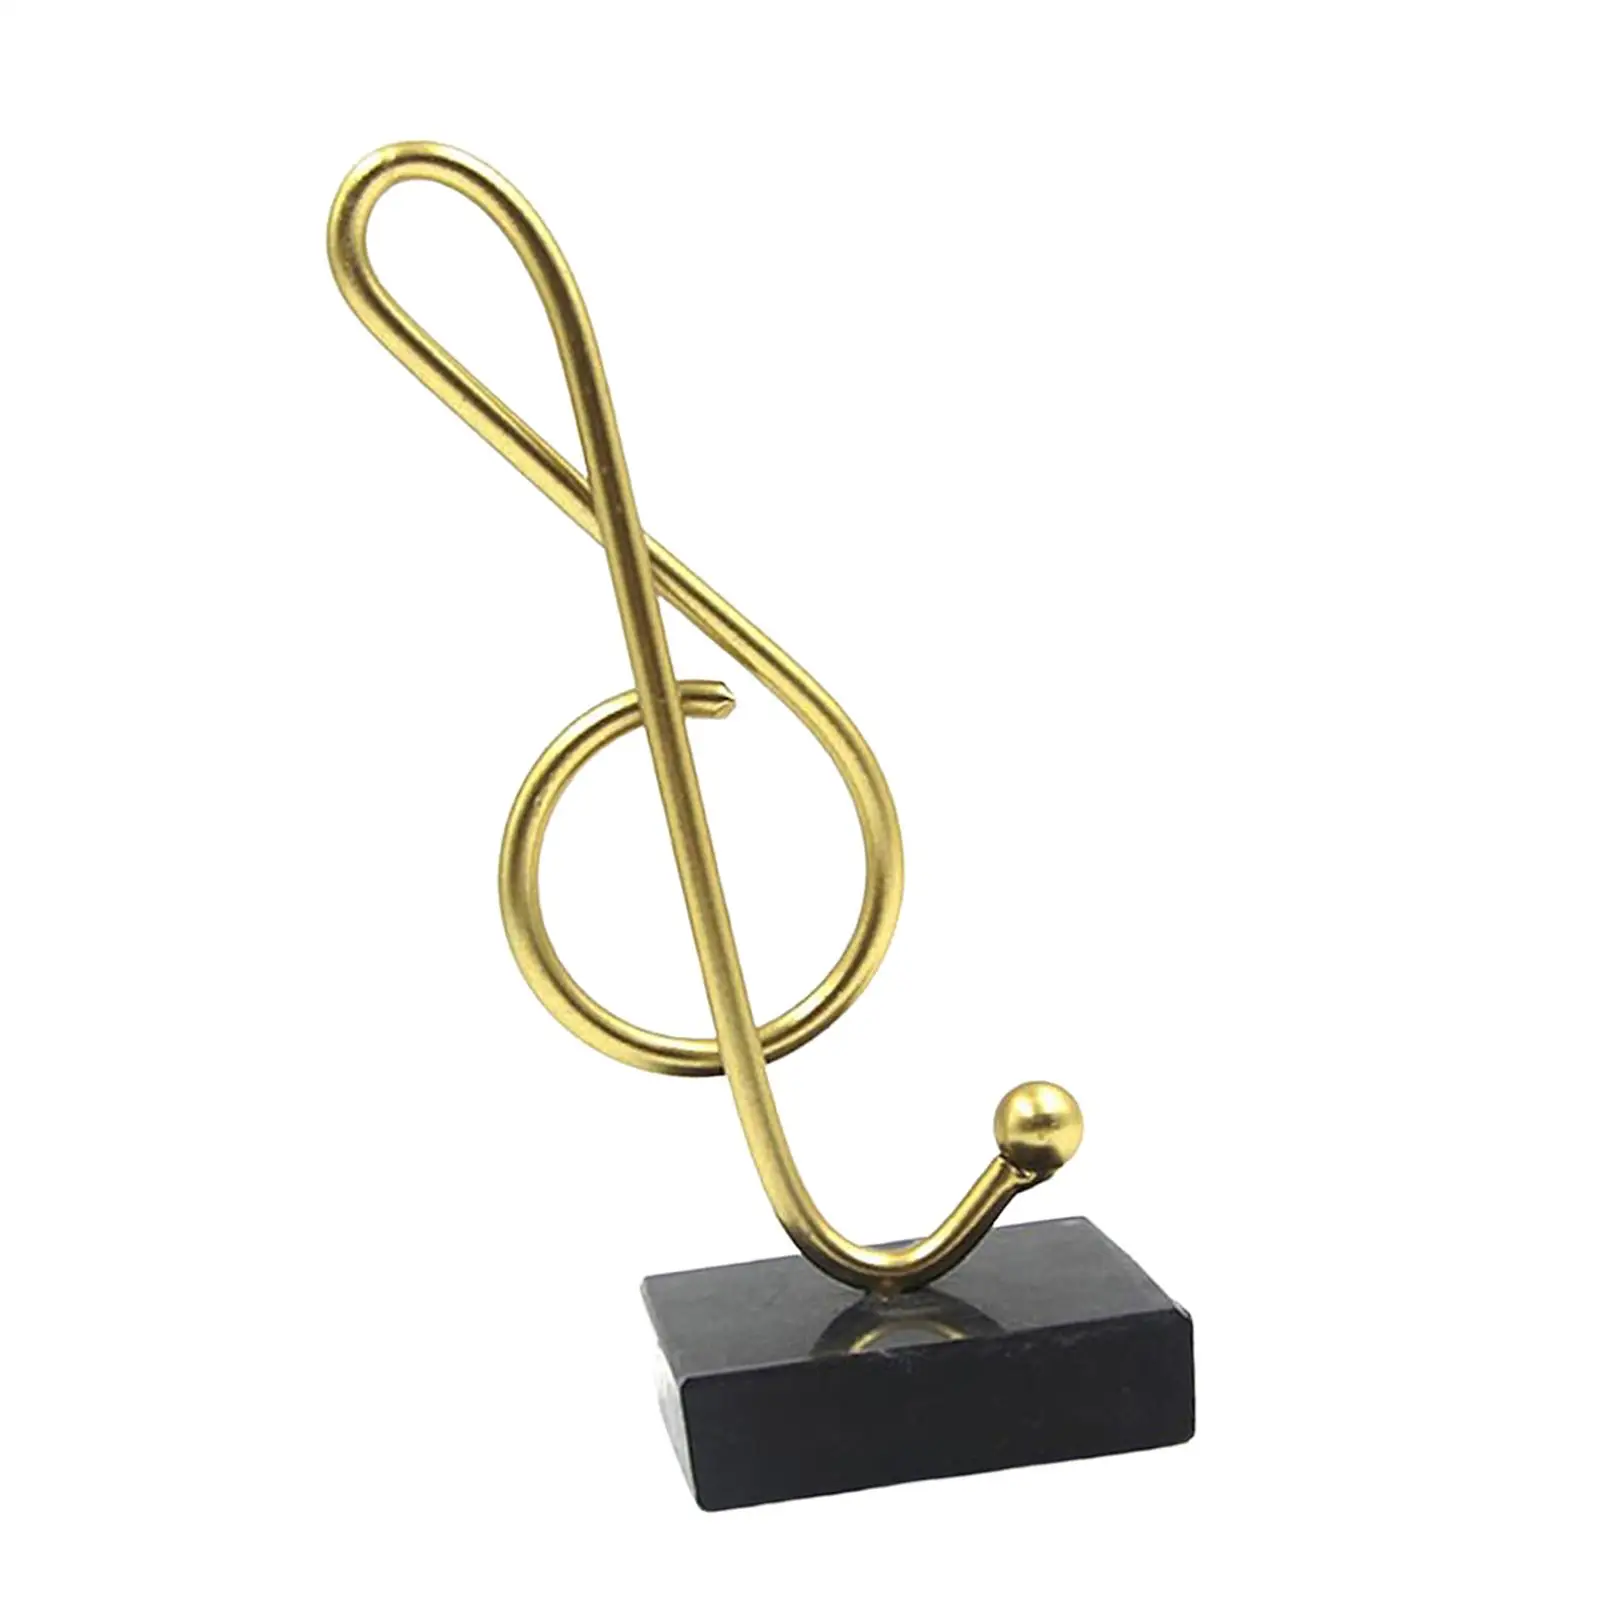 Luxury Musical Note Statue Art Decorative Collectible Craft Ornament for Souvenir Living Room Bookshelf Table Decoration